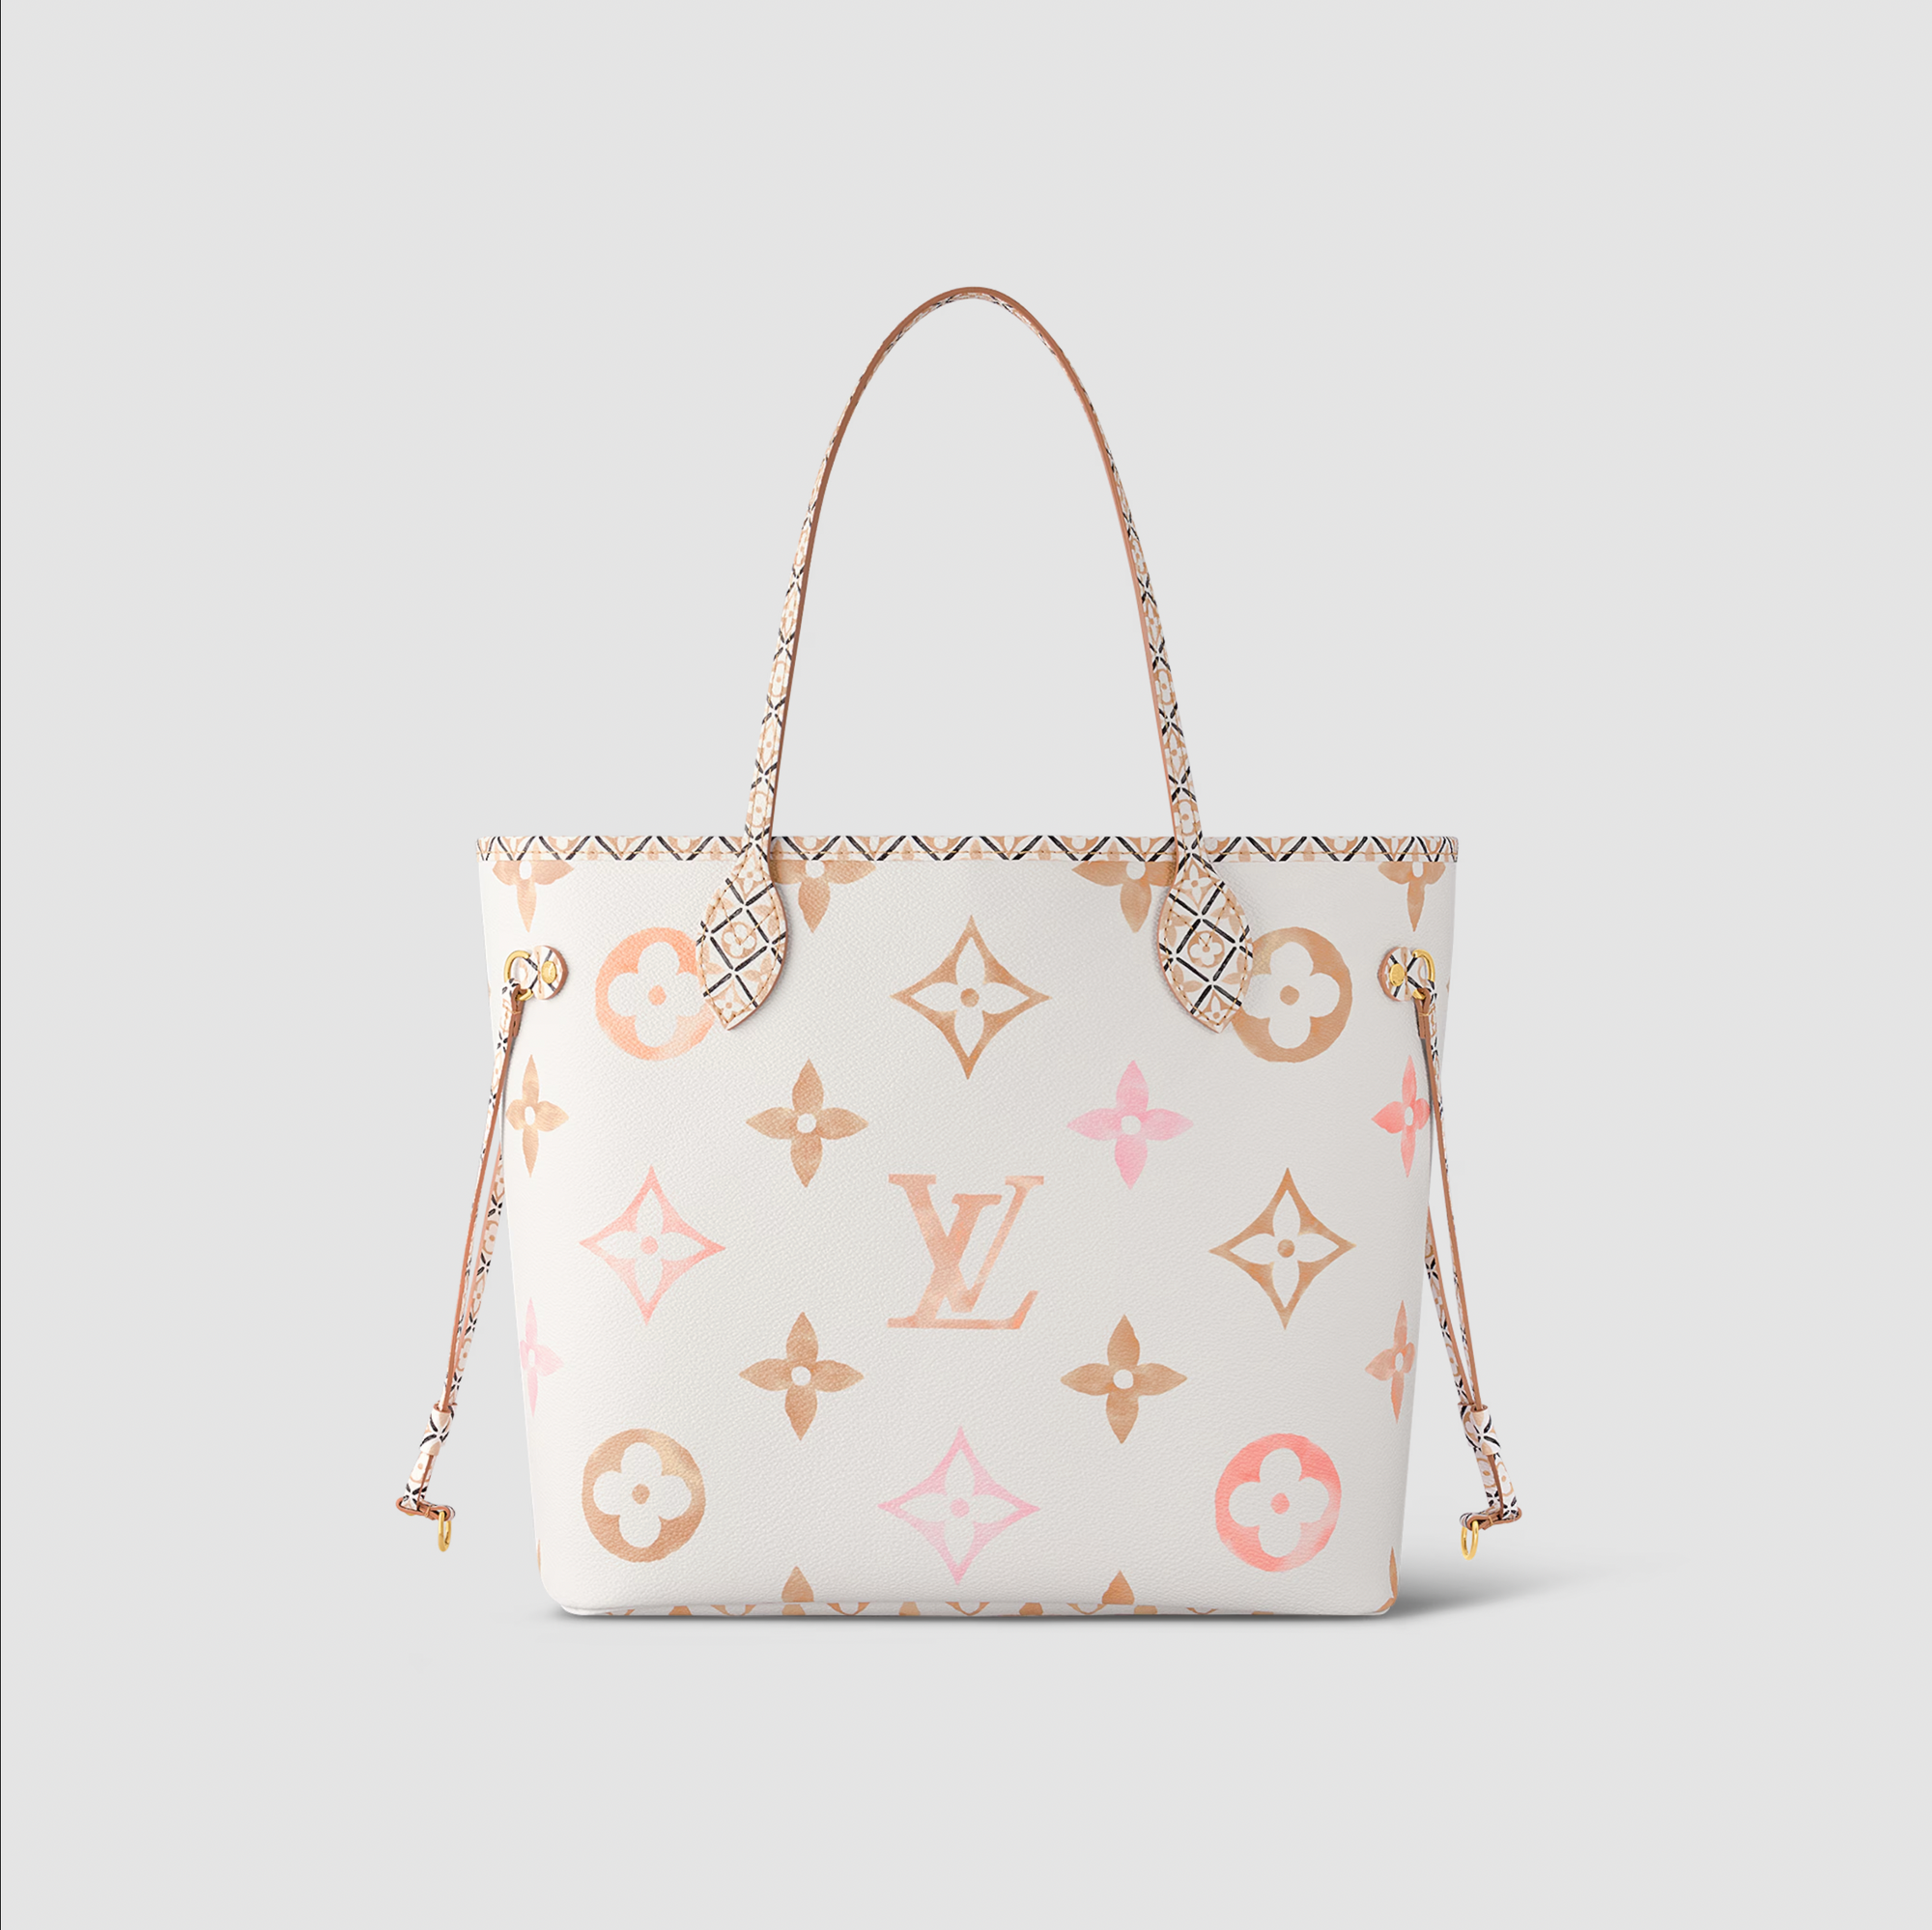 LOUIS VUITTON BY THE POOL NEVERFULL MM PINK GIANT FLOWER MONOGRAM BAG **NO  POUCH